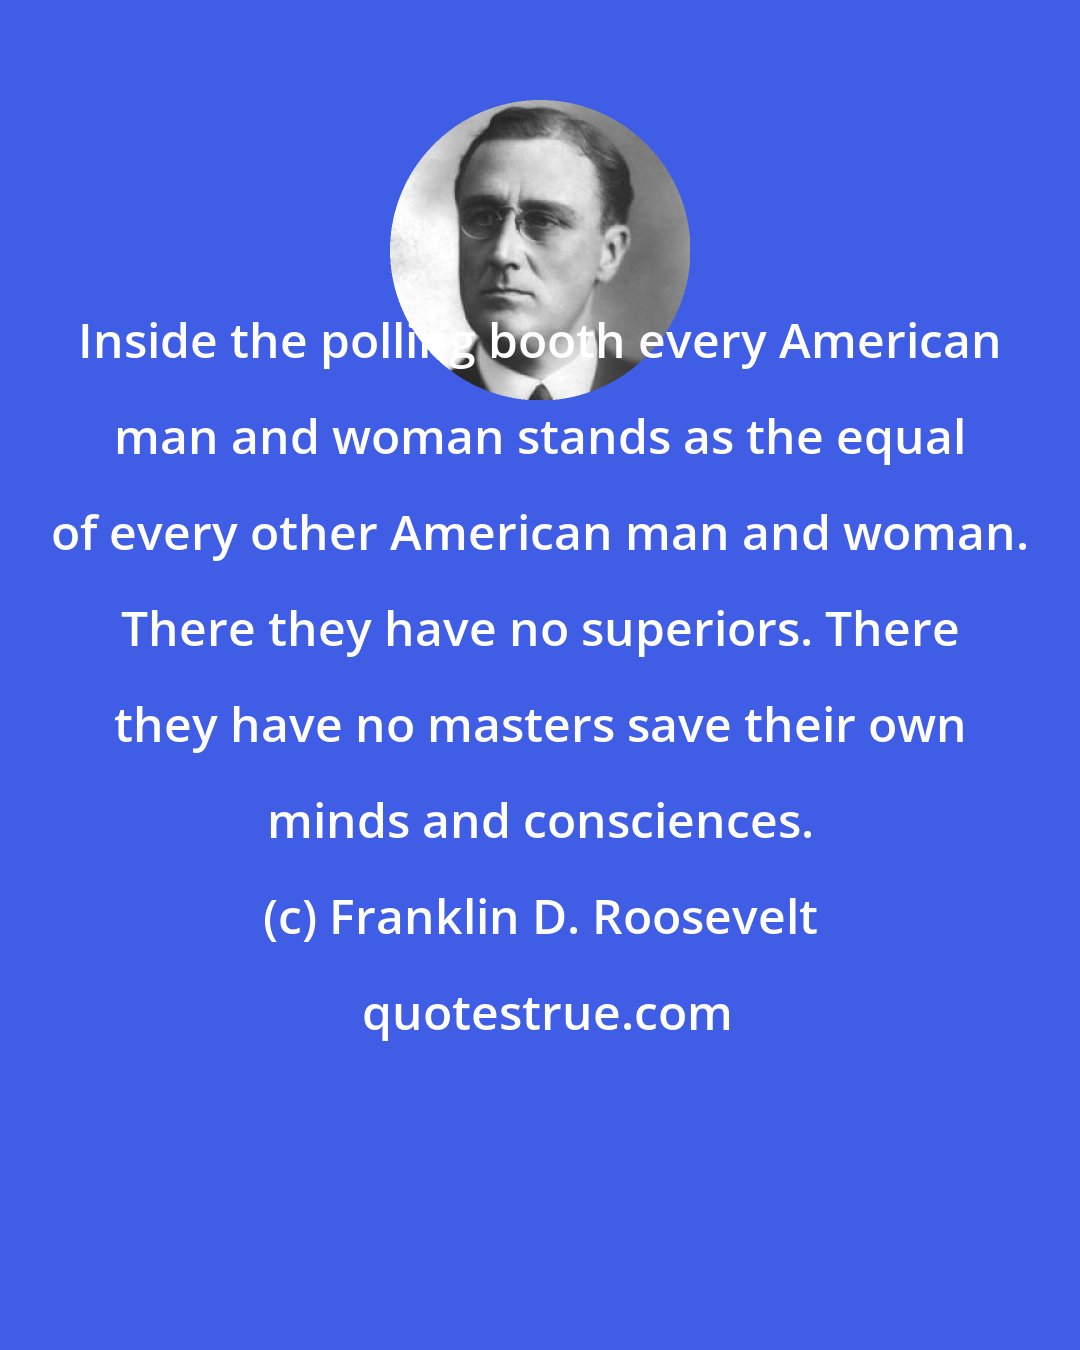 Franklin D. Roosevelt: Inside the polling booth every American man and woman stands as the equal of every other American man and woman. There they have no superiors. There they have no masters save their own minds and consciences.